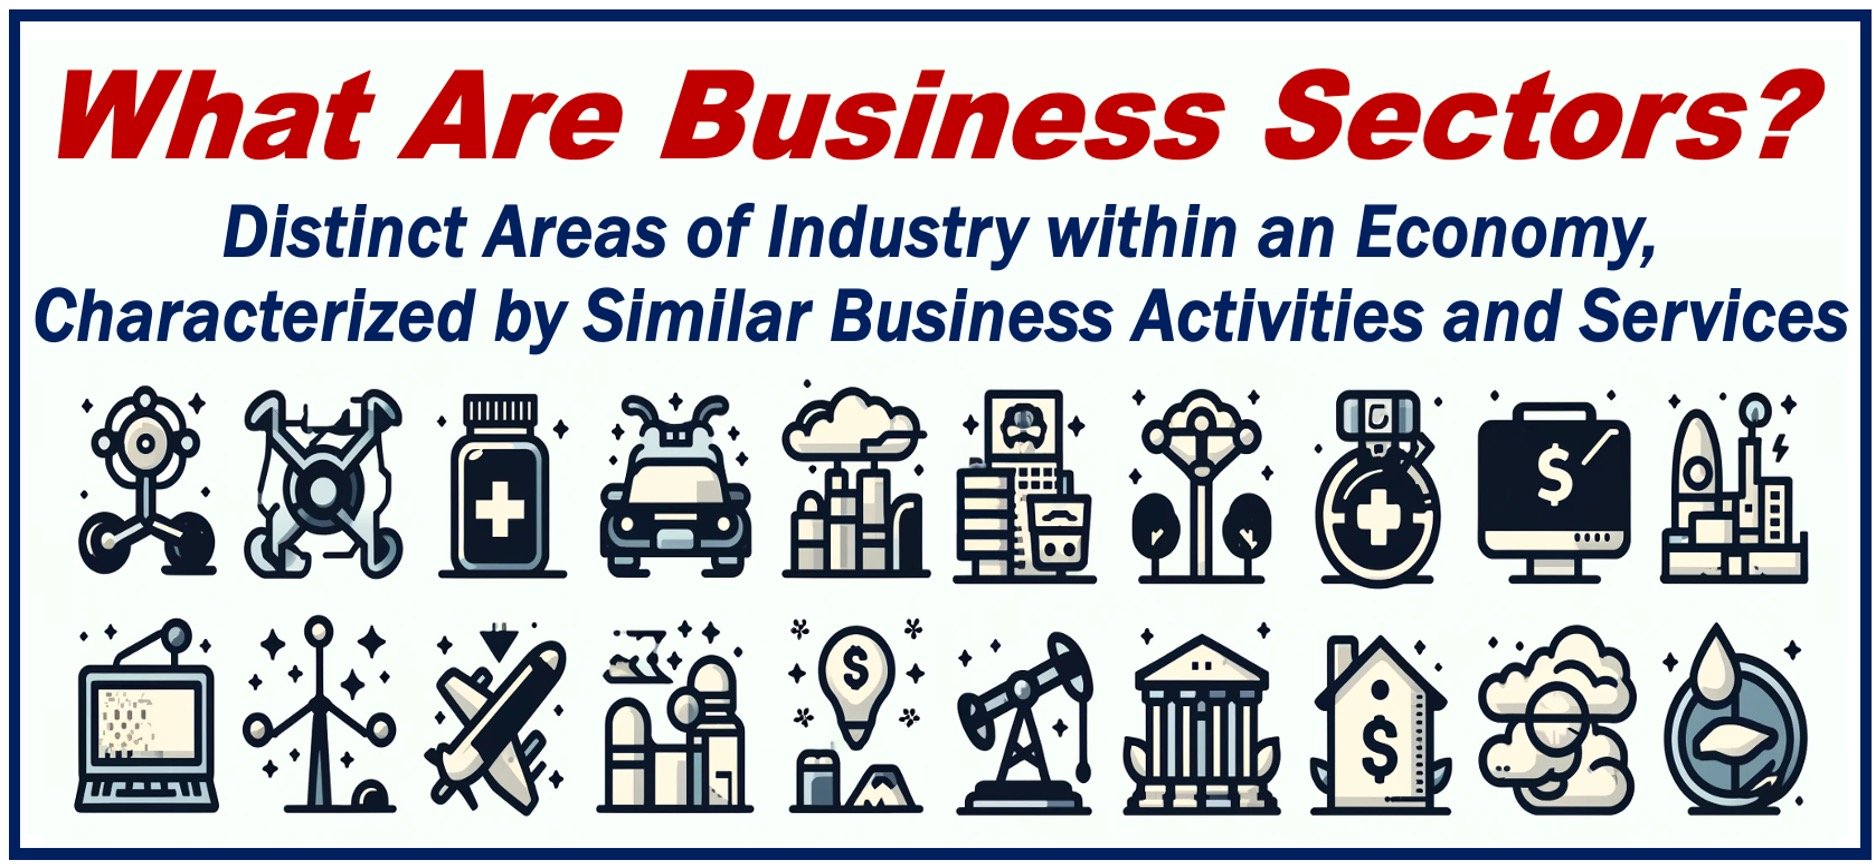 Many industry icons plus a definition of BUSINESS SECTORS.